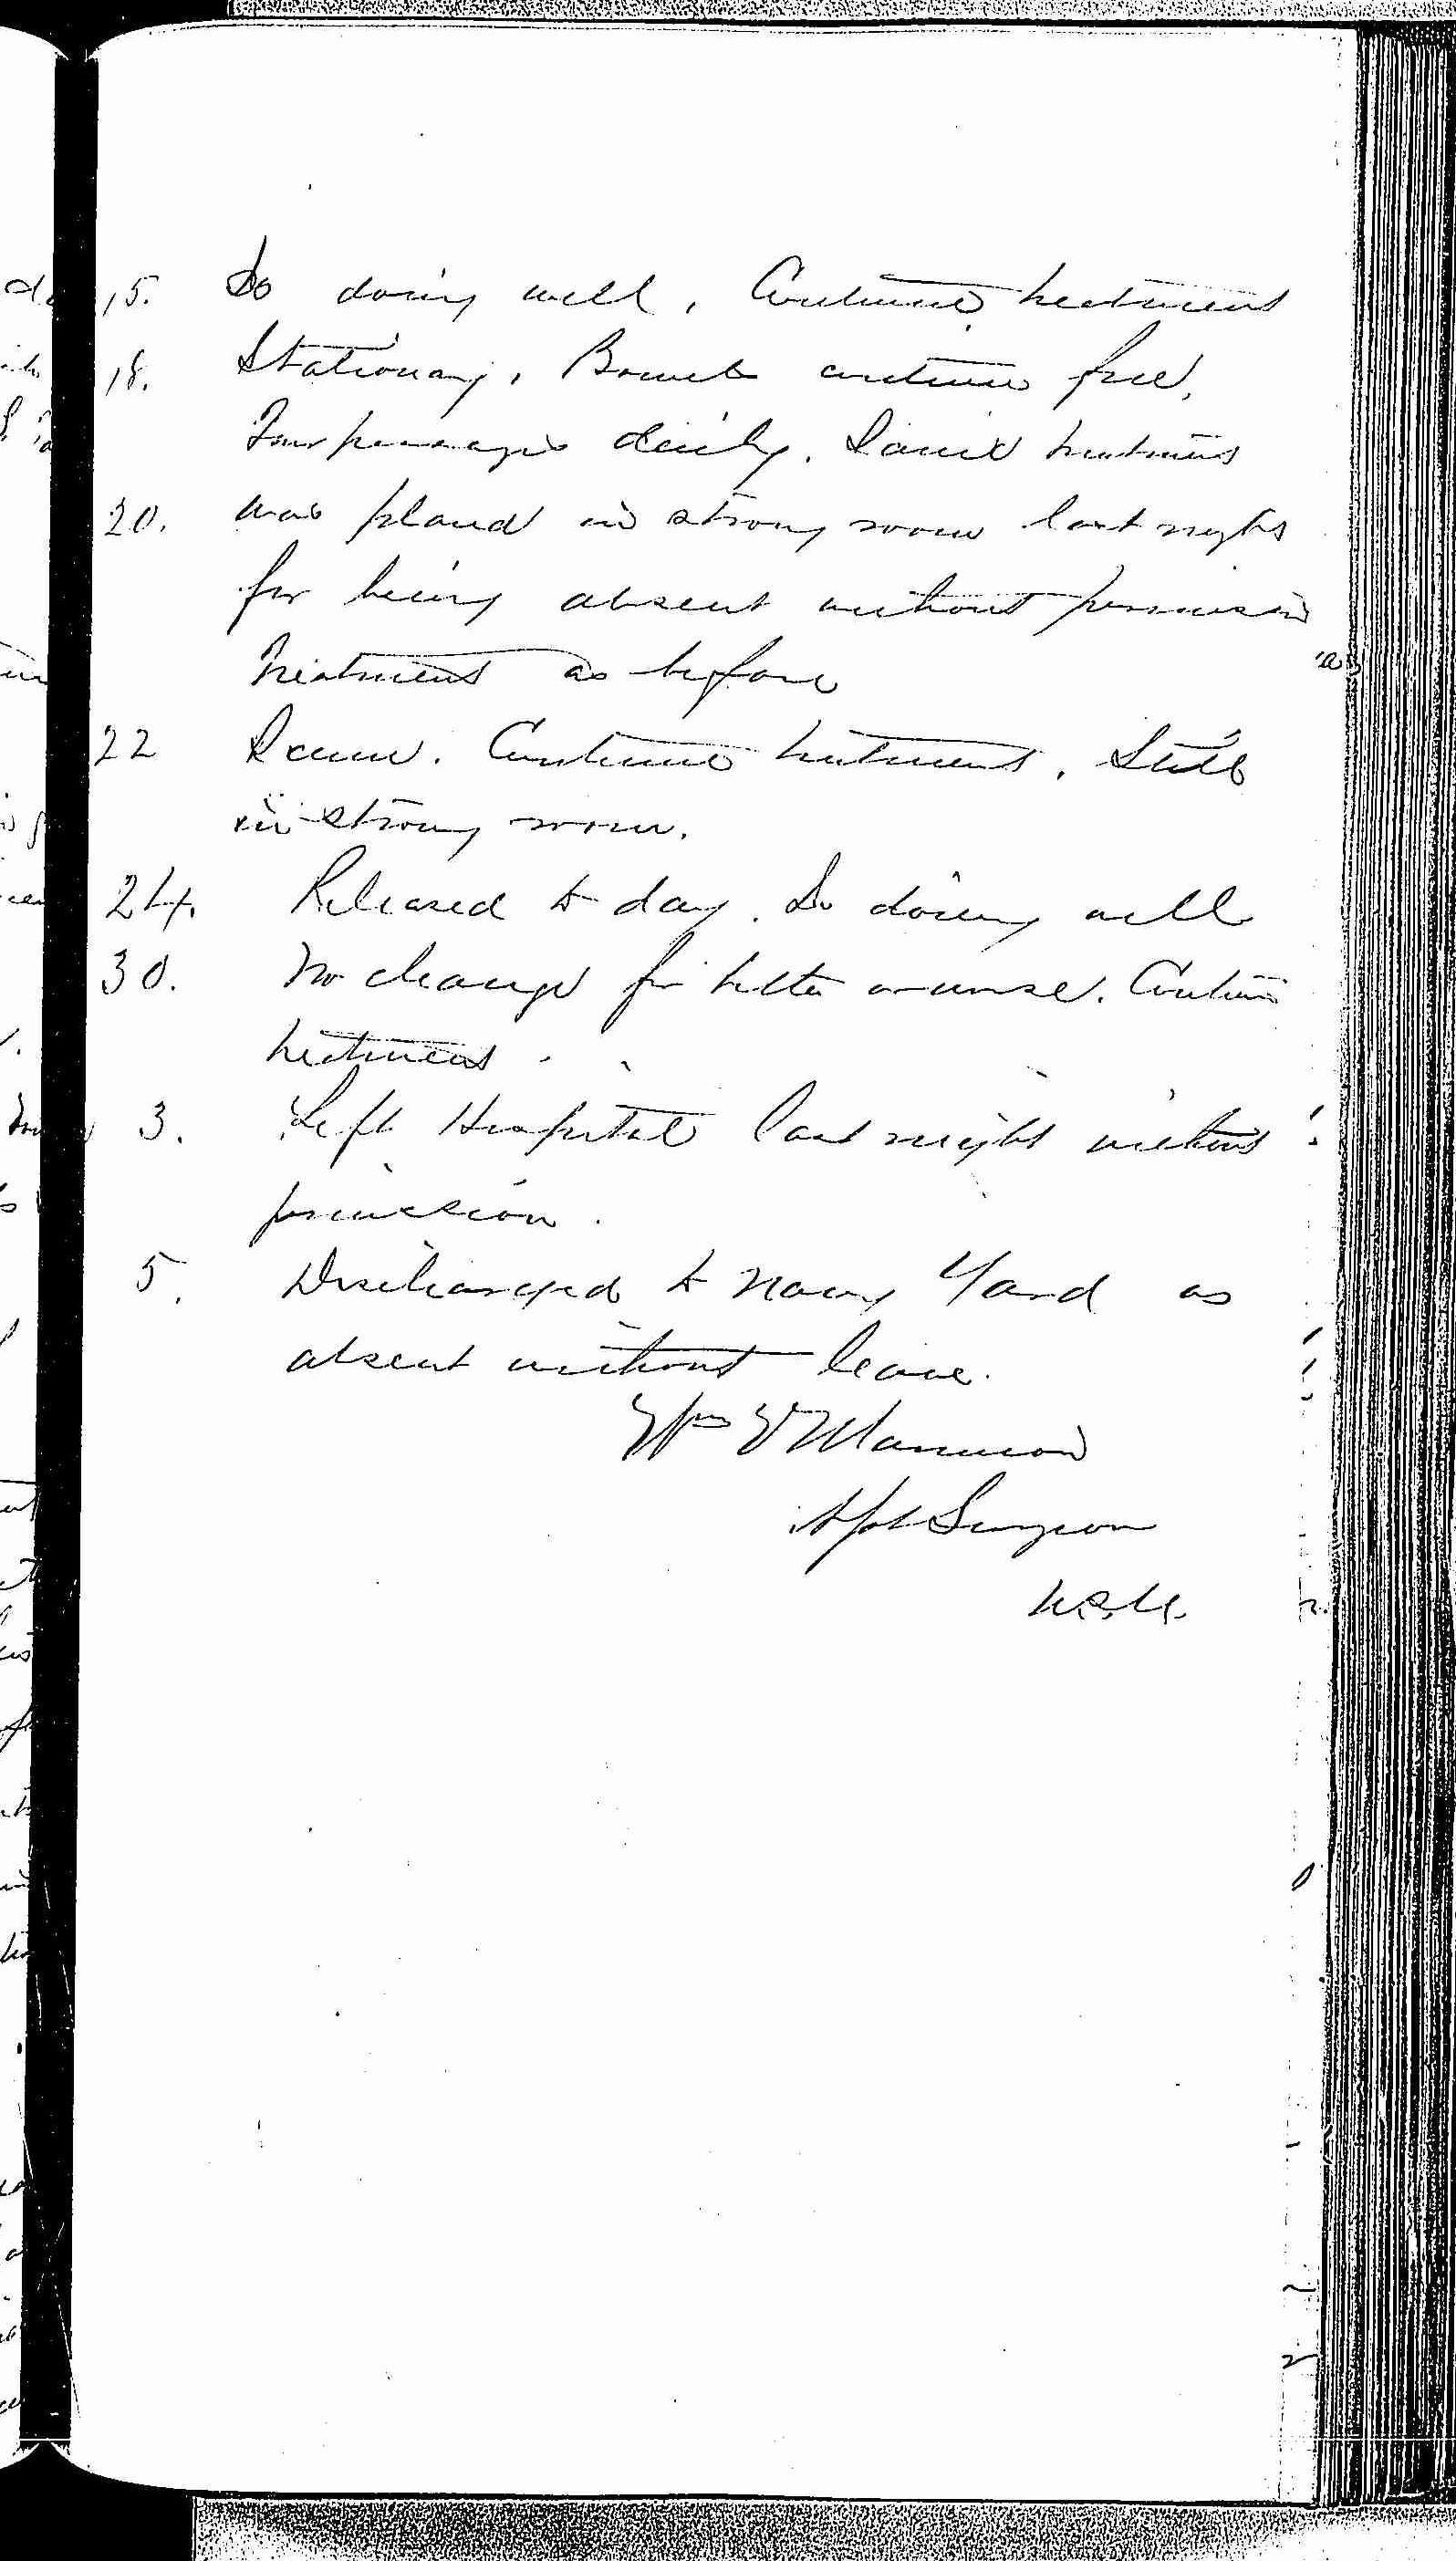 Entry for Edward Stevens (page 5 of 5) in the log Hospital Tickets and Case Papers - Naval Hospital - Washington, D.C. - 1868-69